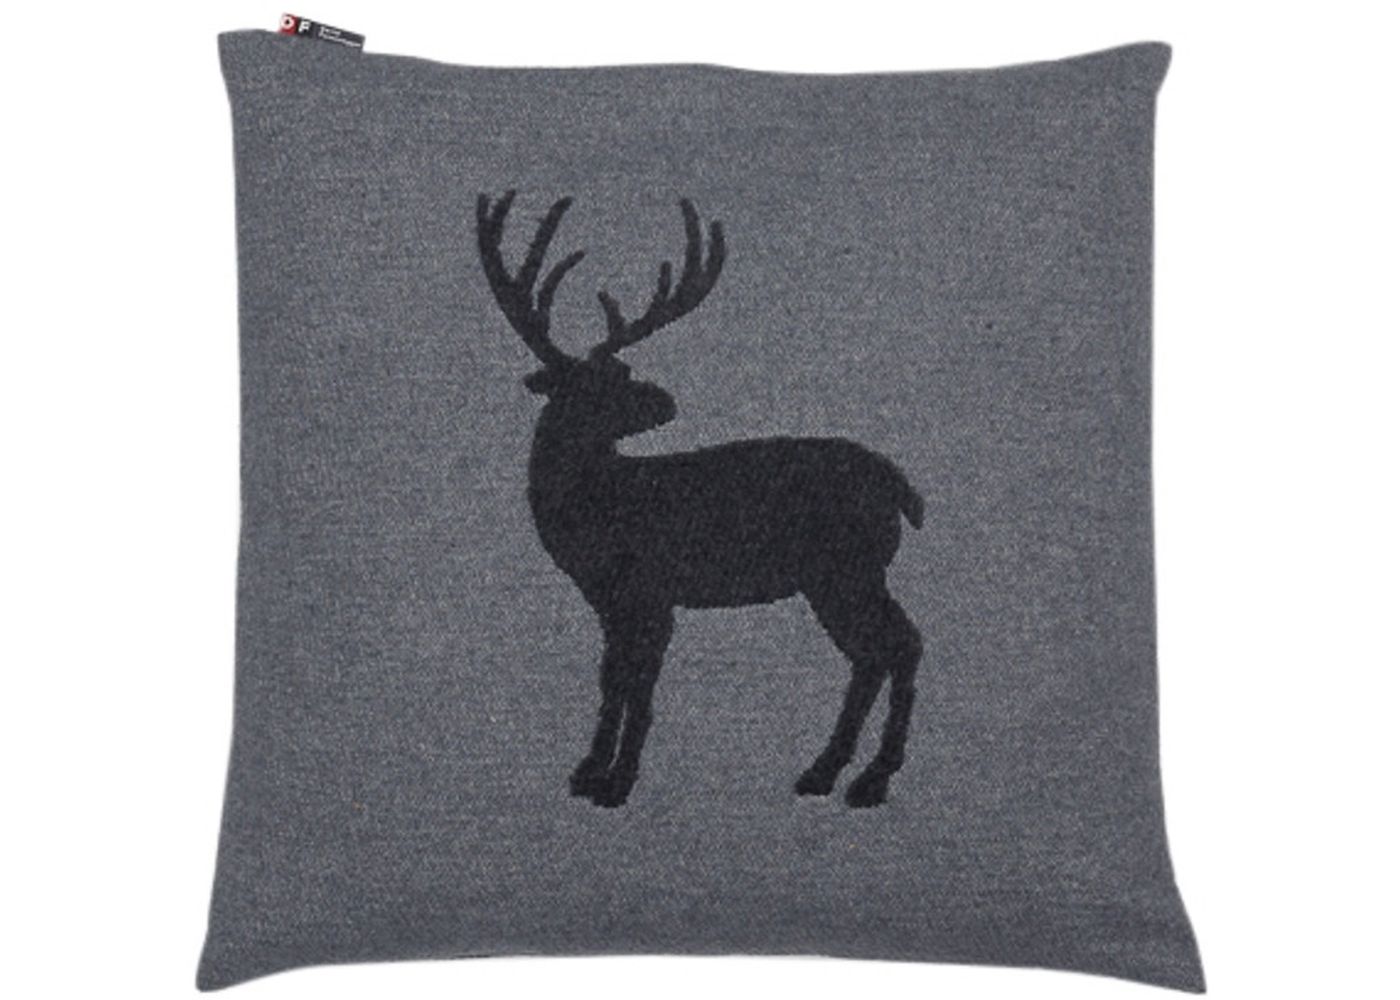 DECO cushion cover “stag”